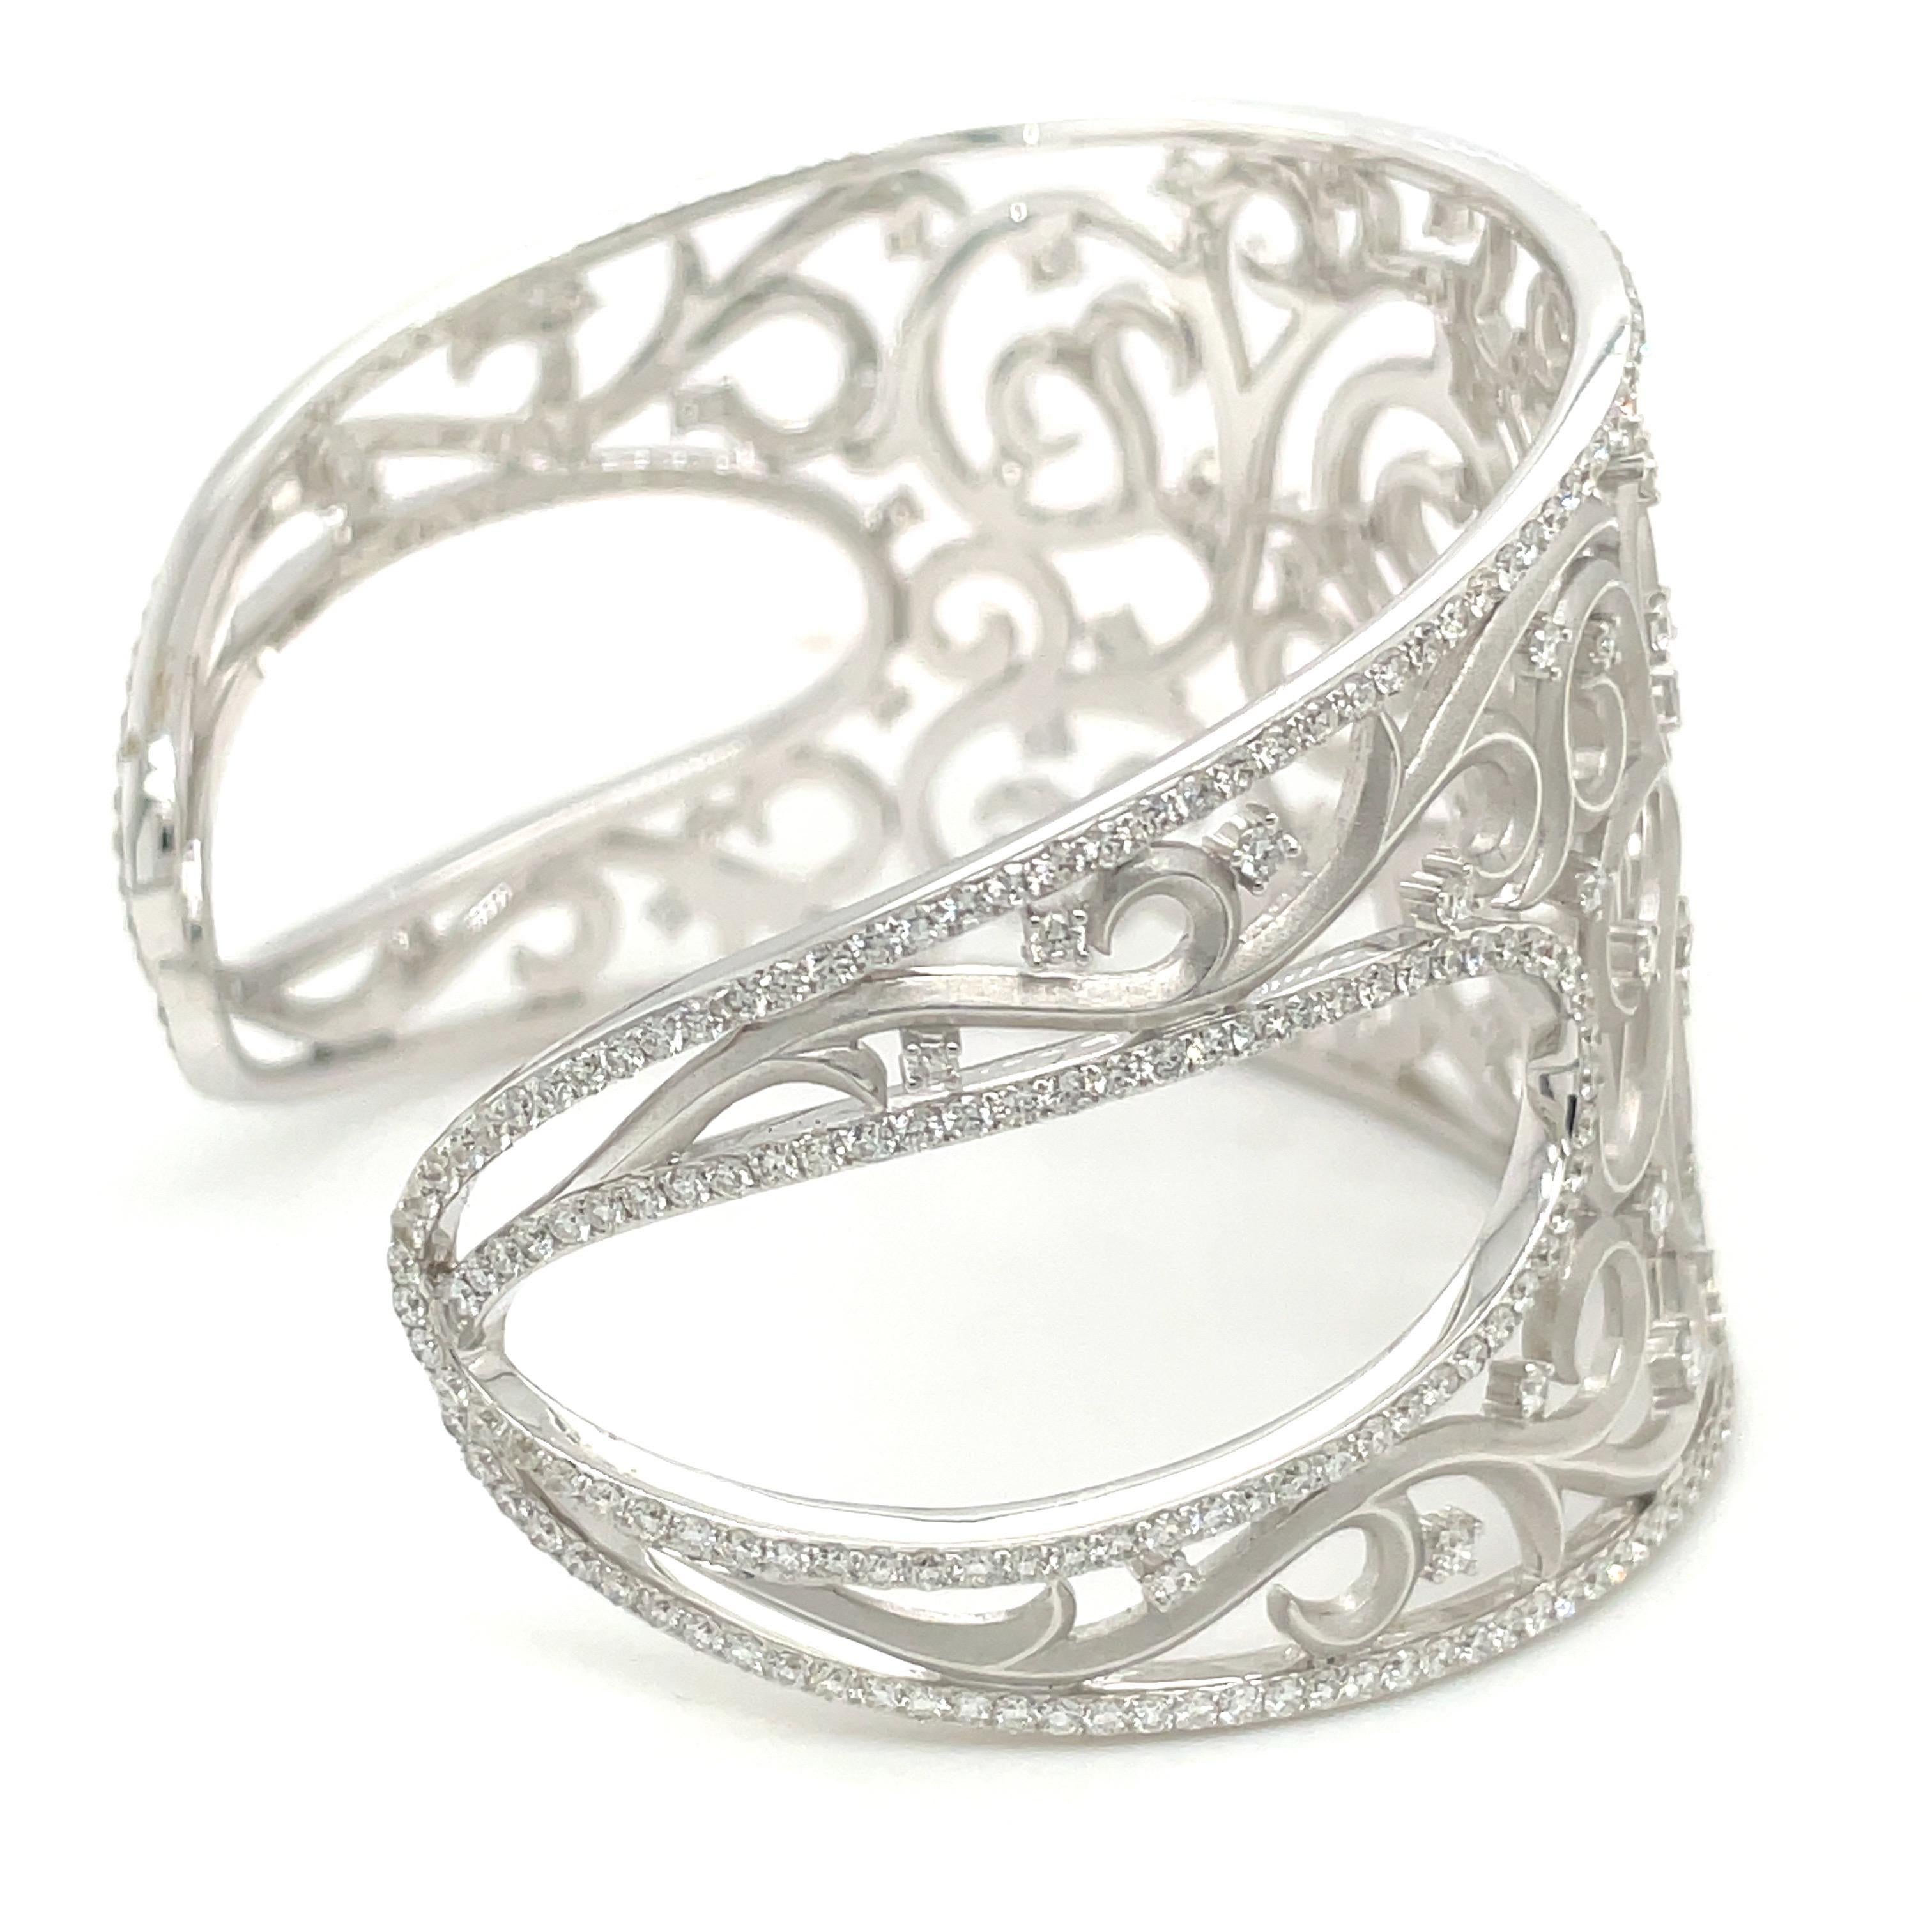 Cellini 18kt White Gold and Diamond 4.90Ct. Lace Cuff Bracelet For Sale 11